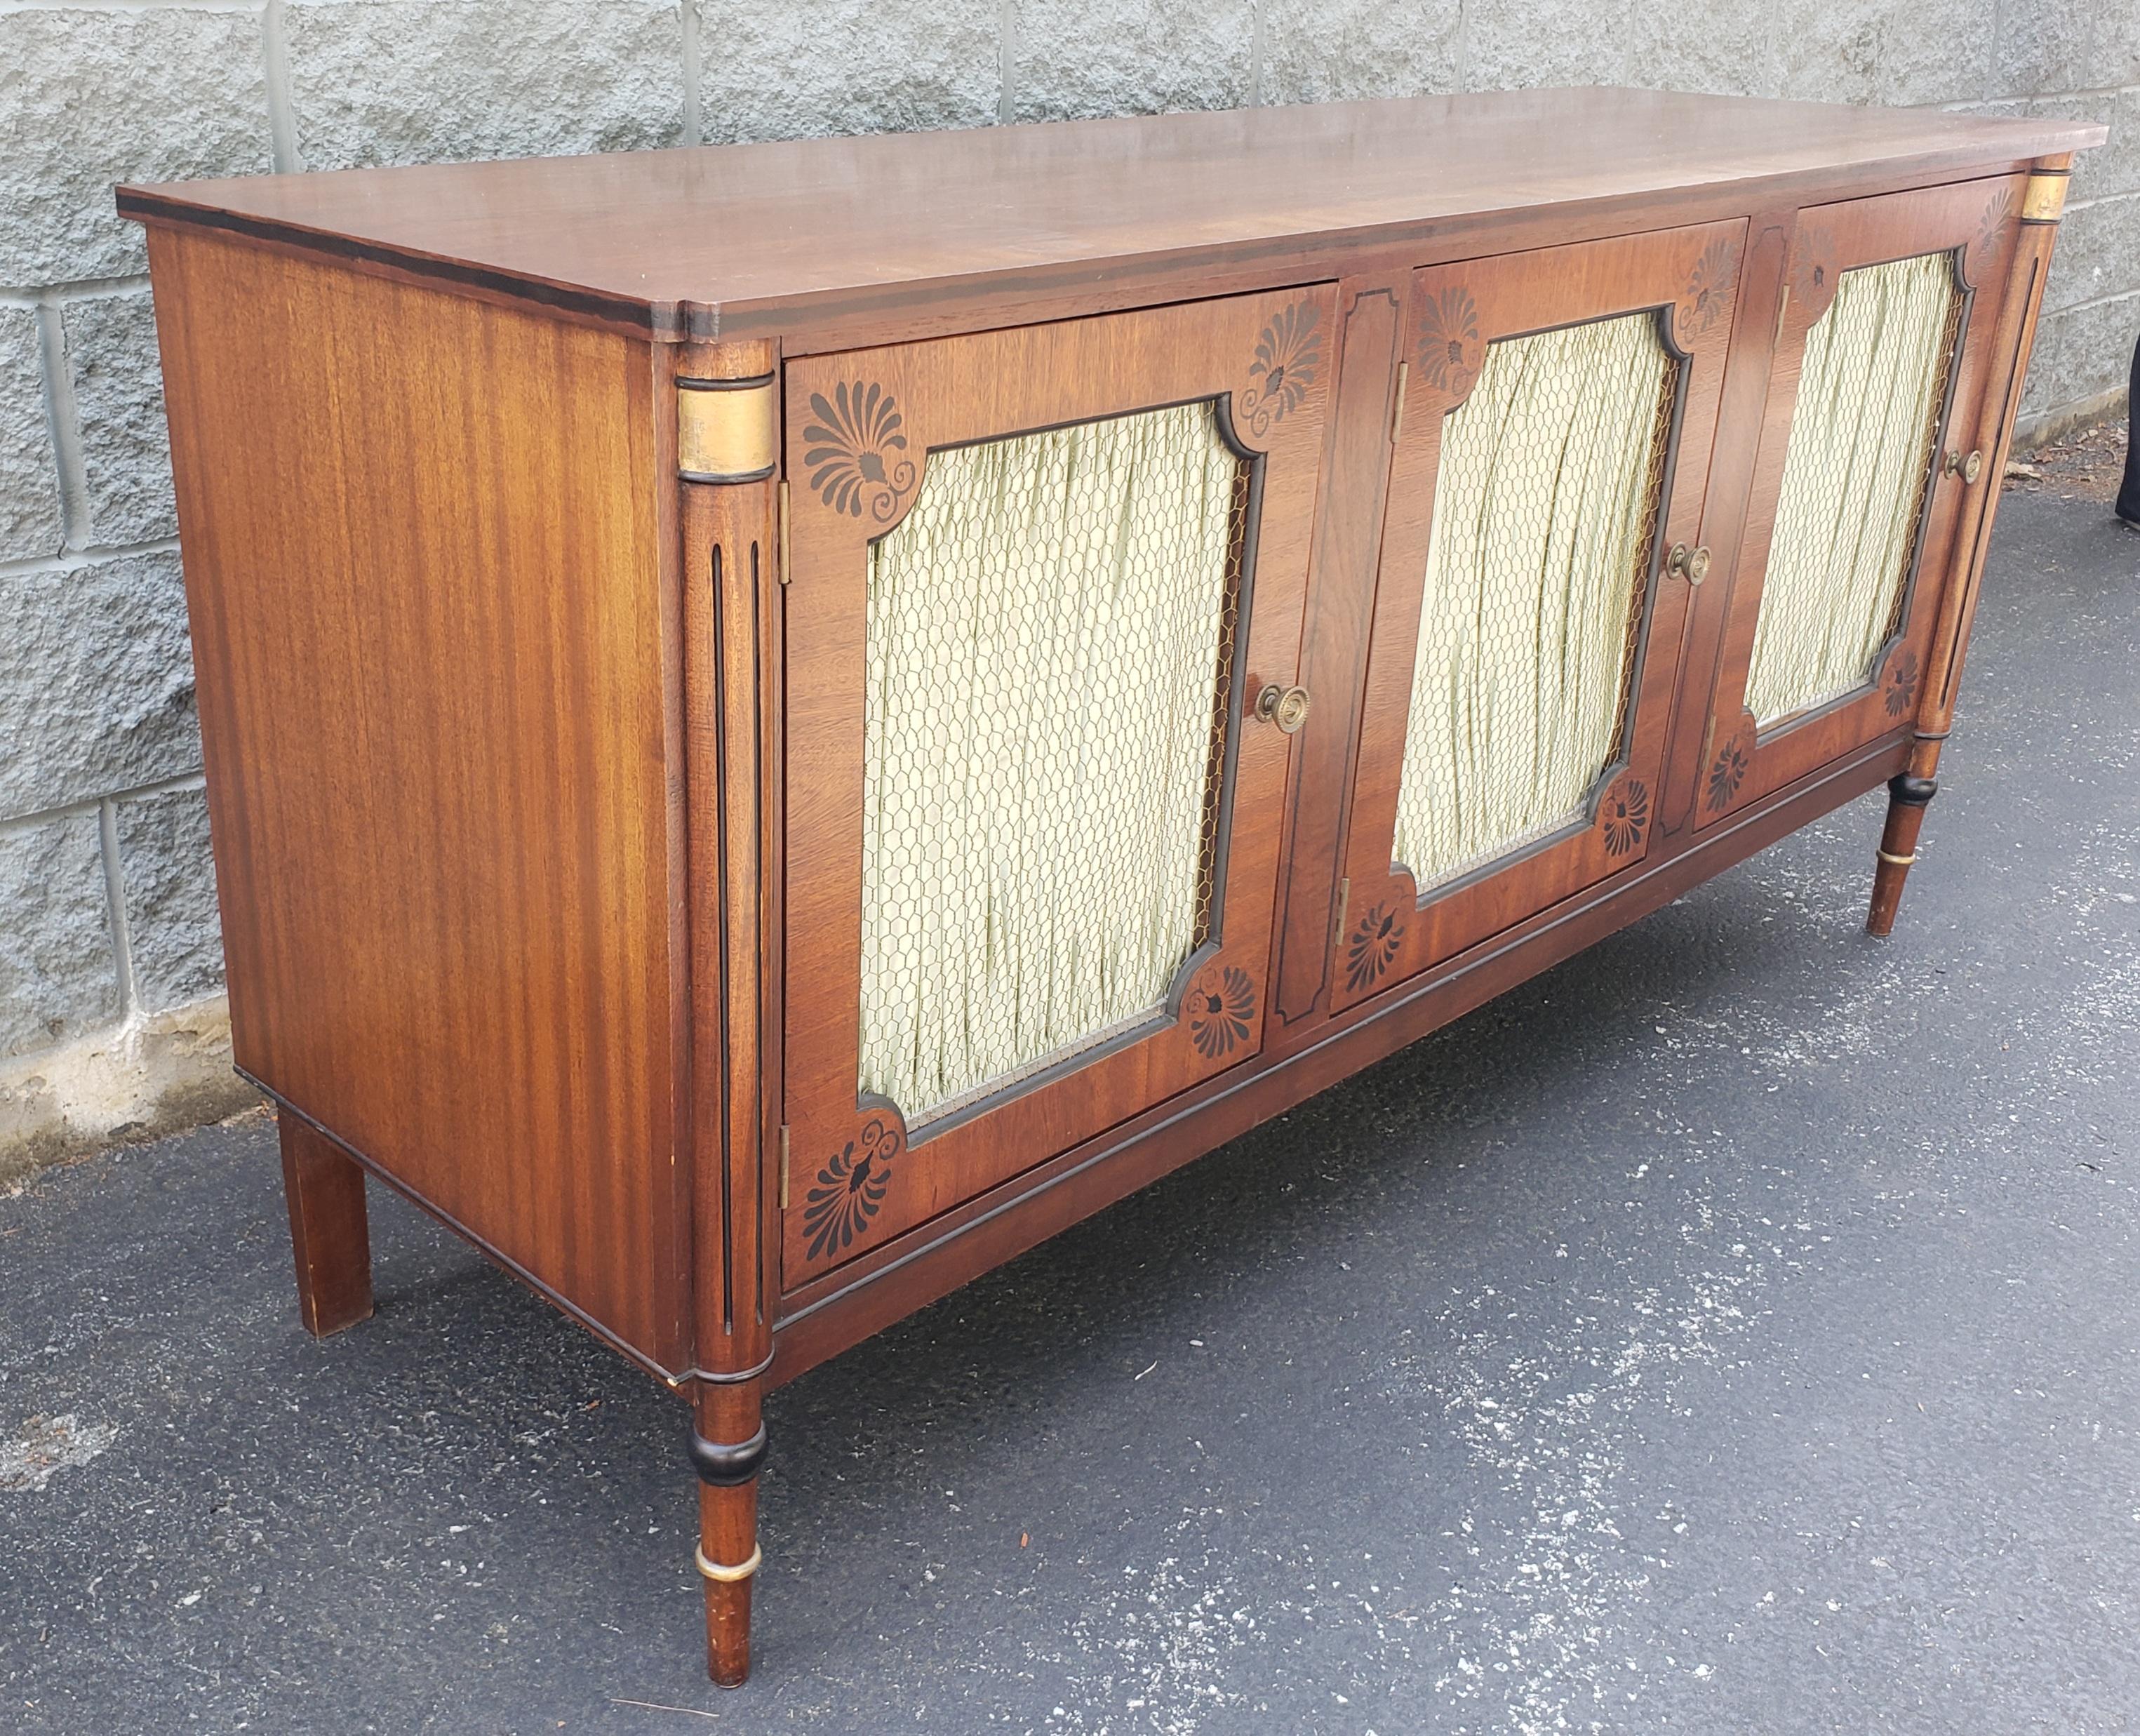 Nicholas James Neoclassic Mahogany Sideboard with Curtains and Mesh Doors 2